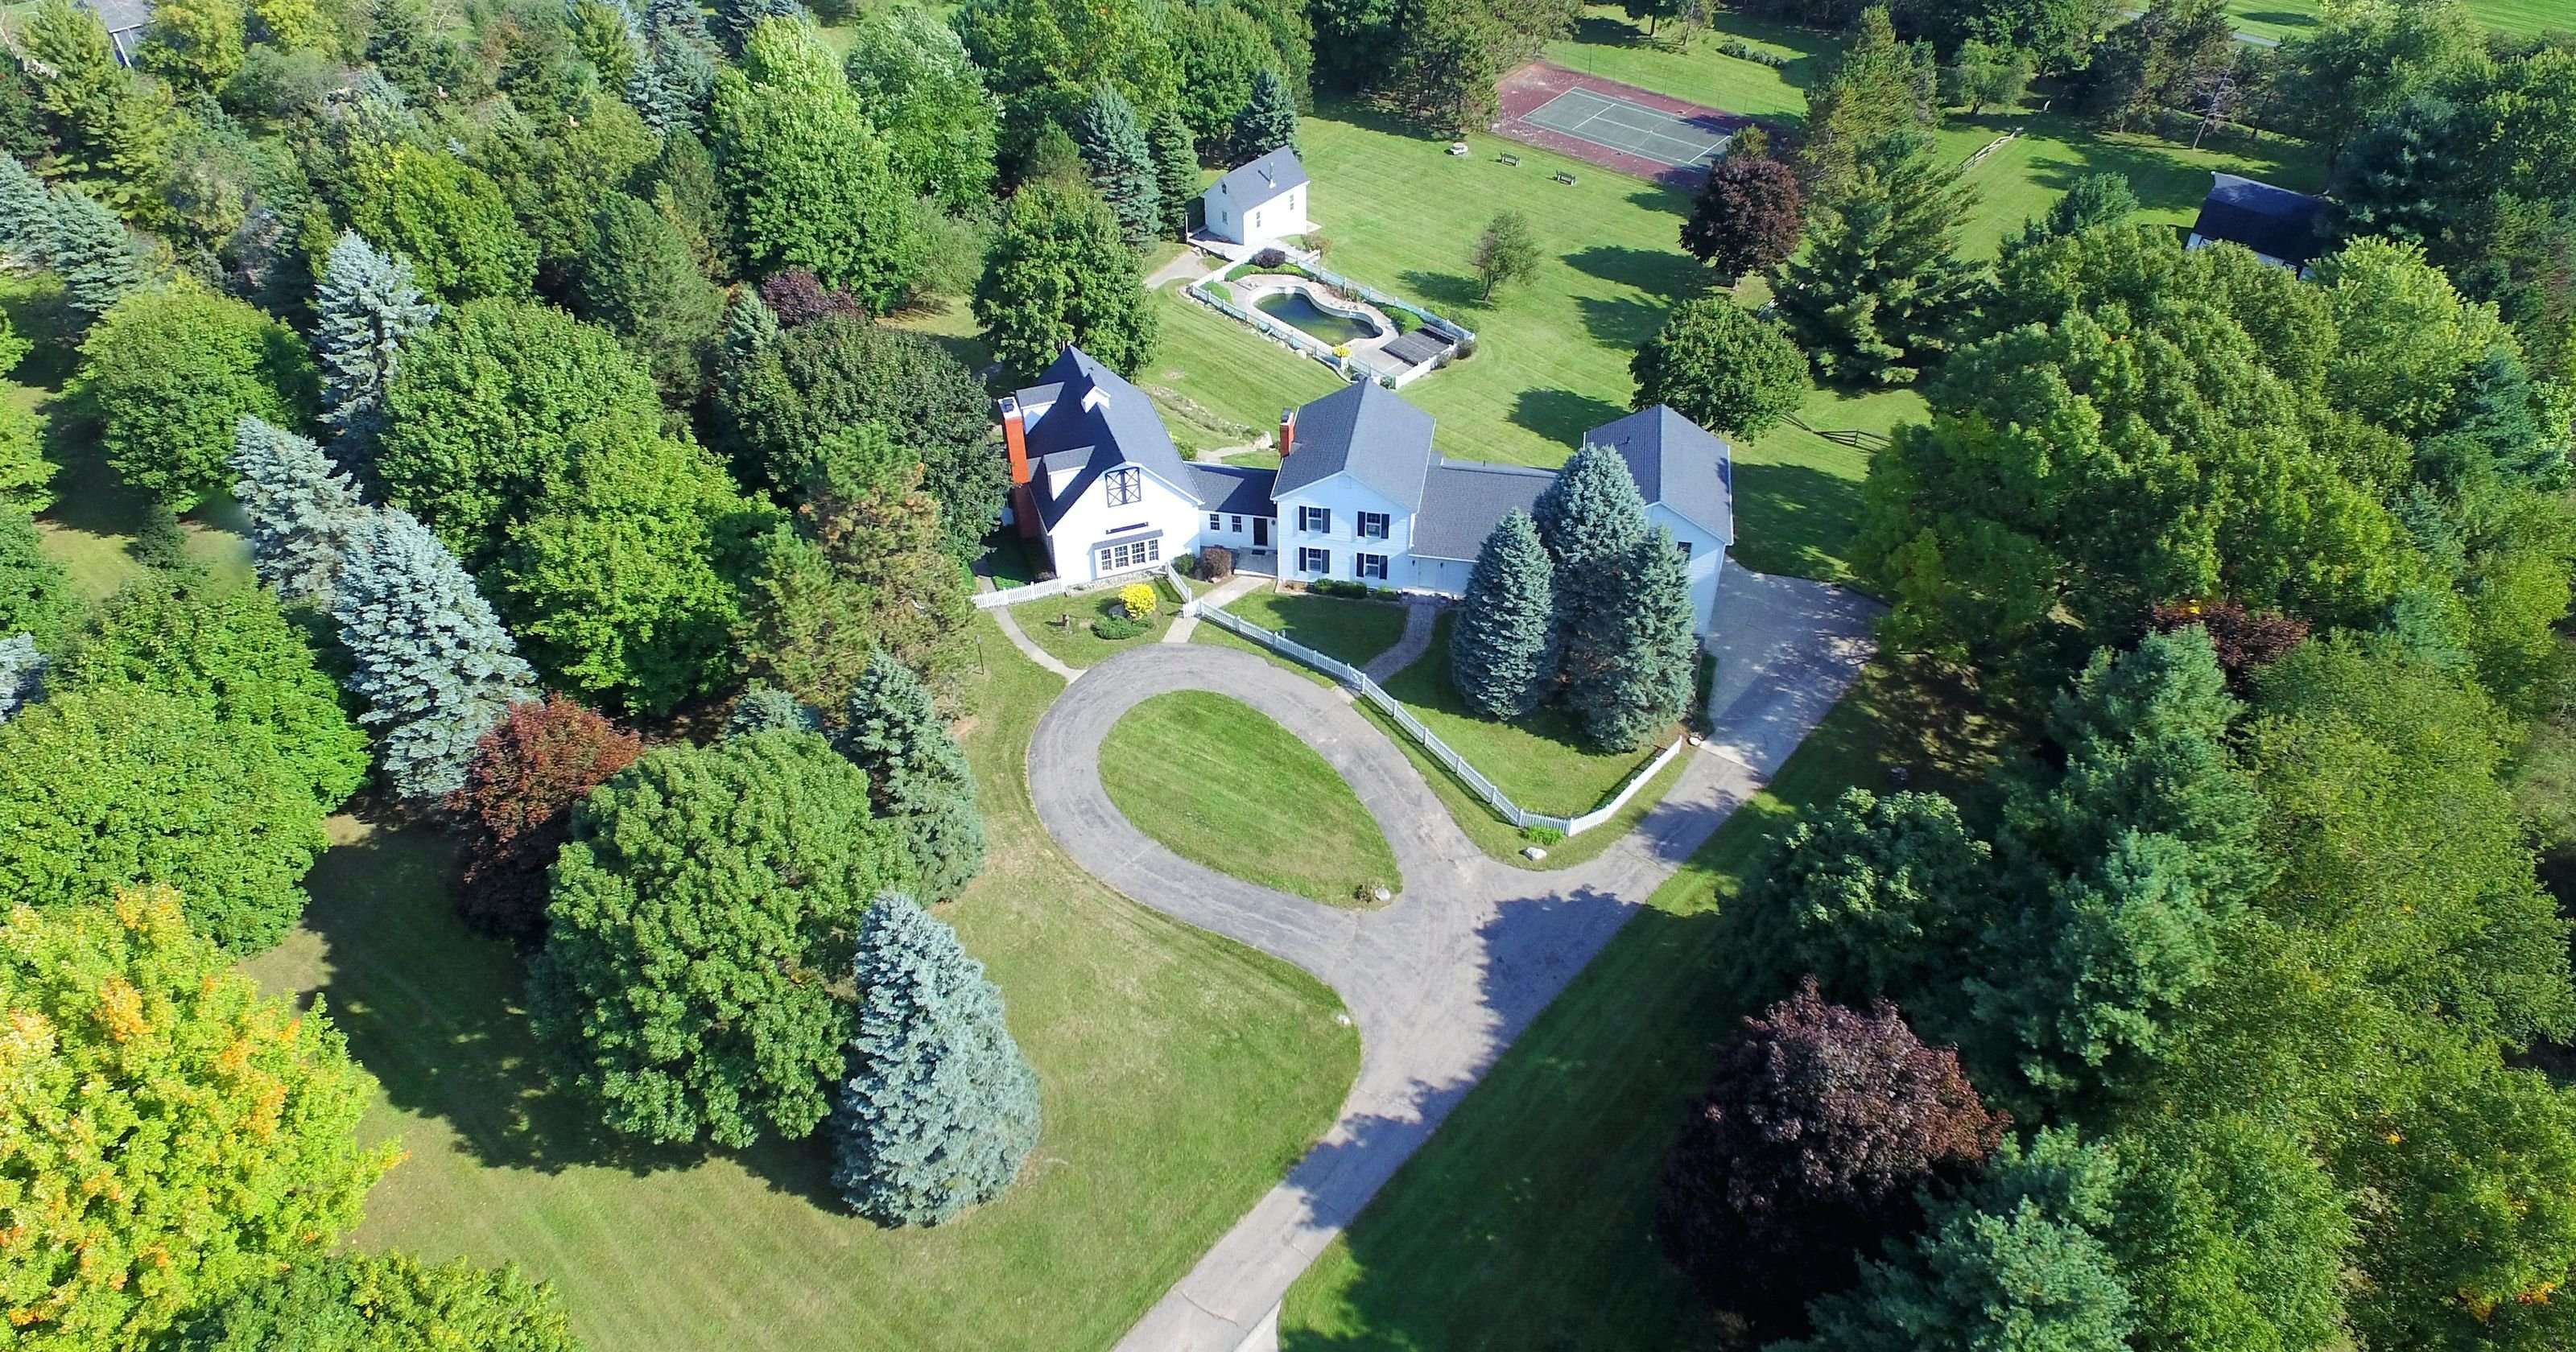 image for Kid Rock's posh childhood home listed in Macomb County for $1.3M